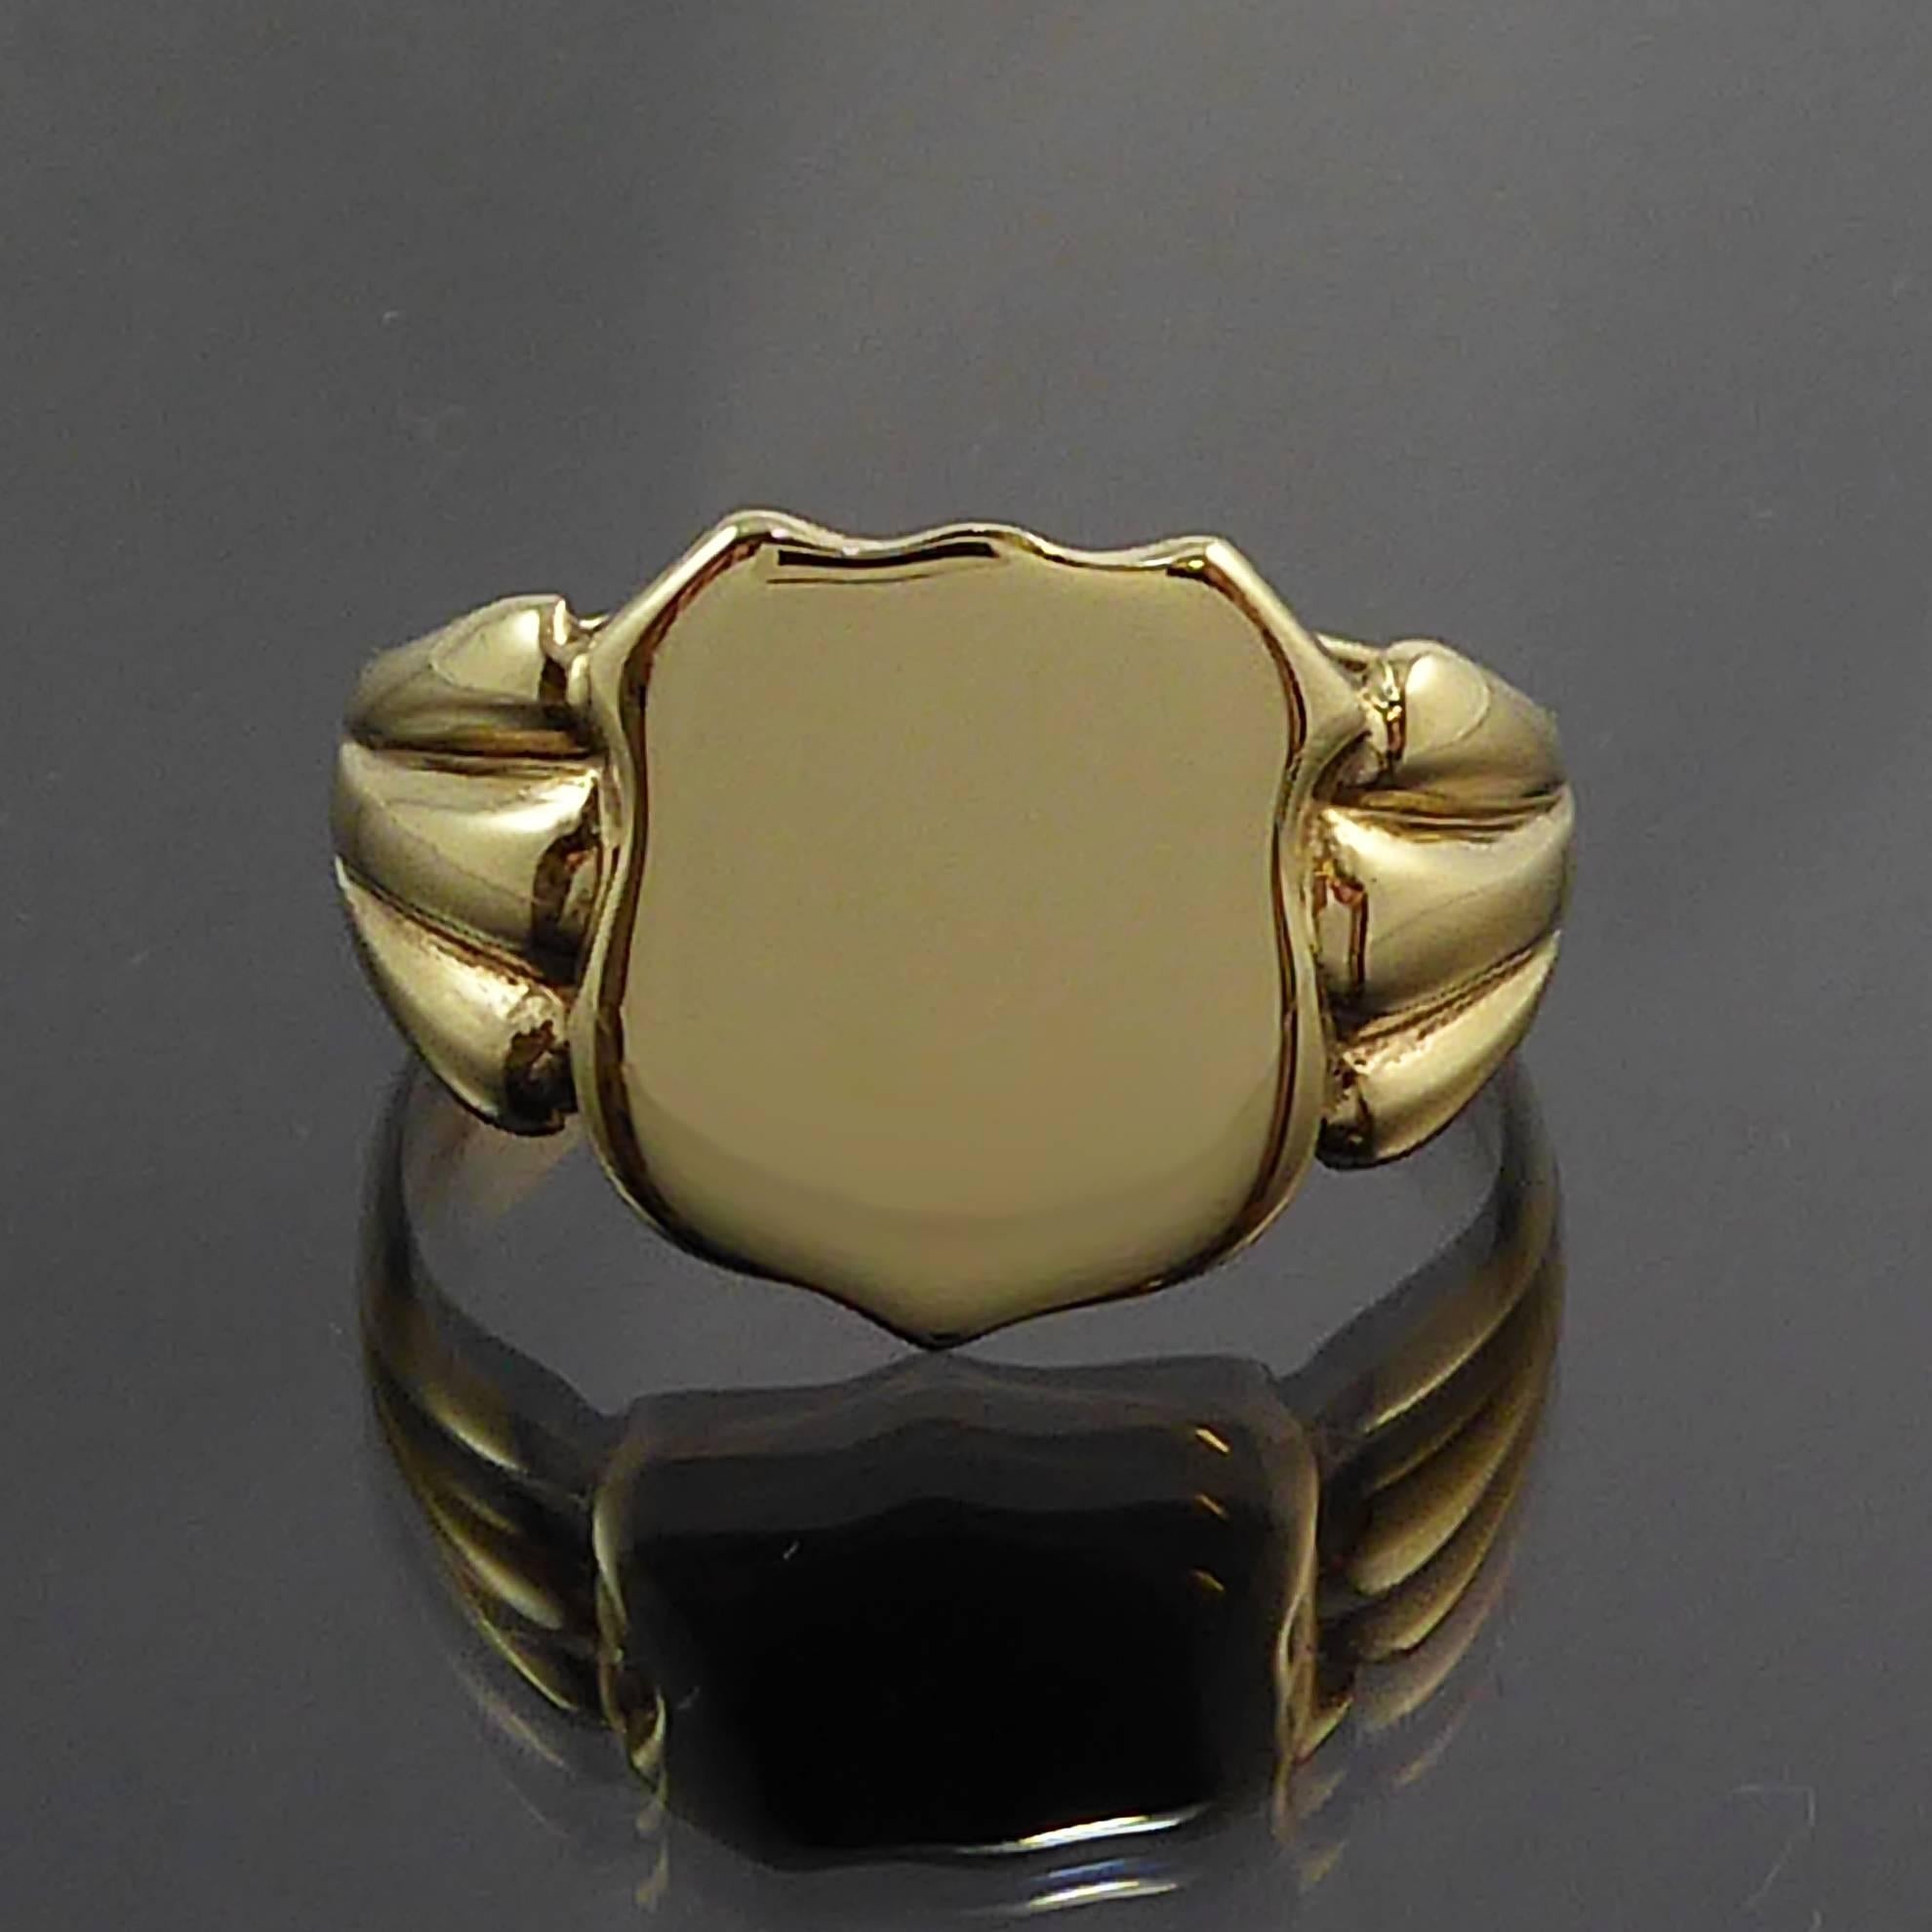 A masculine and rugged signet ring from the 1950s in 9ct yellow gold with a classic shield shape front.  Grooved shoulders are an attractive decorative detail and lead to a flat cross sectioned band.

The condition of this ring is absolutely